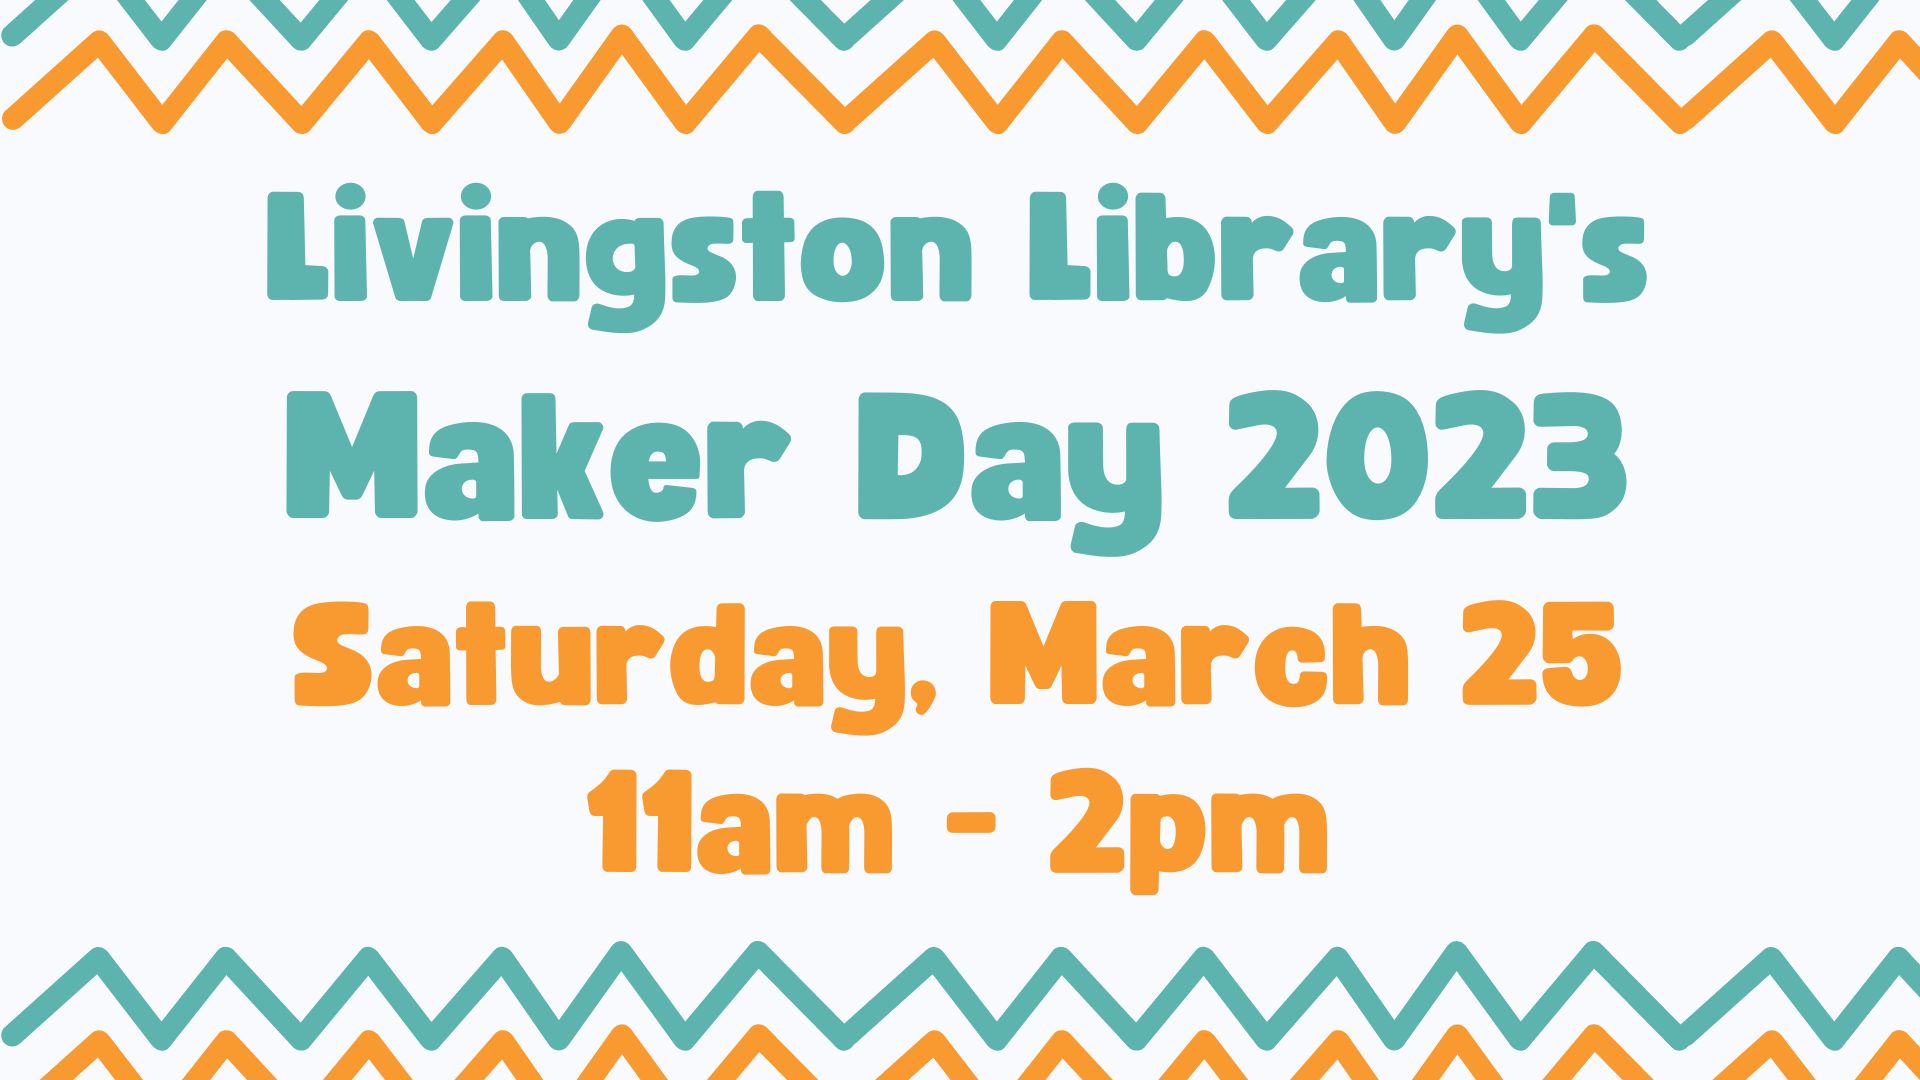 teal text reading livingston library's maker day 2023 and orange text reading saturday march 25 11am to 2pm with teal and orange chevrons on a white background